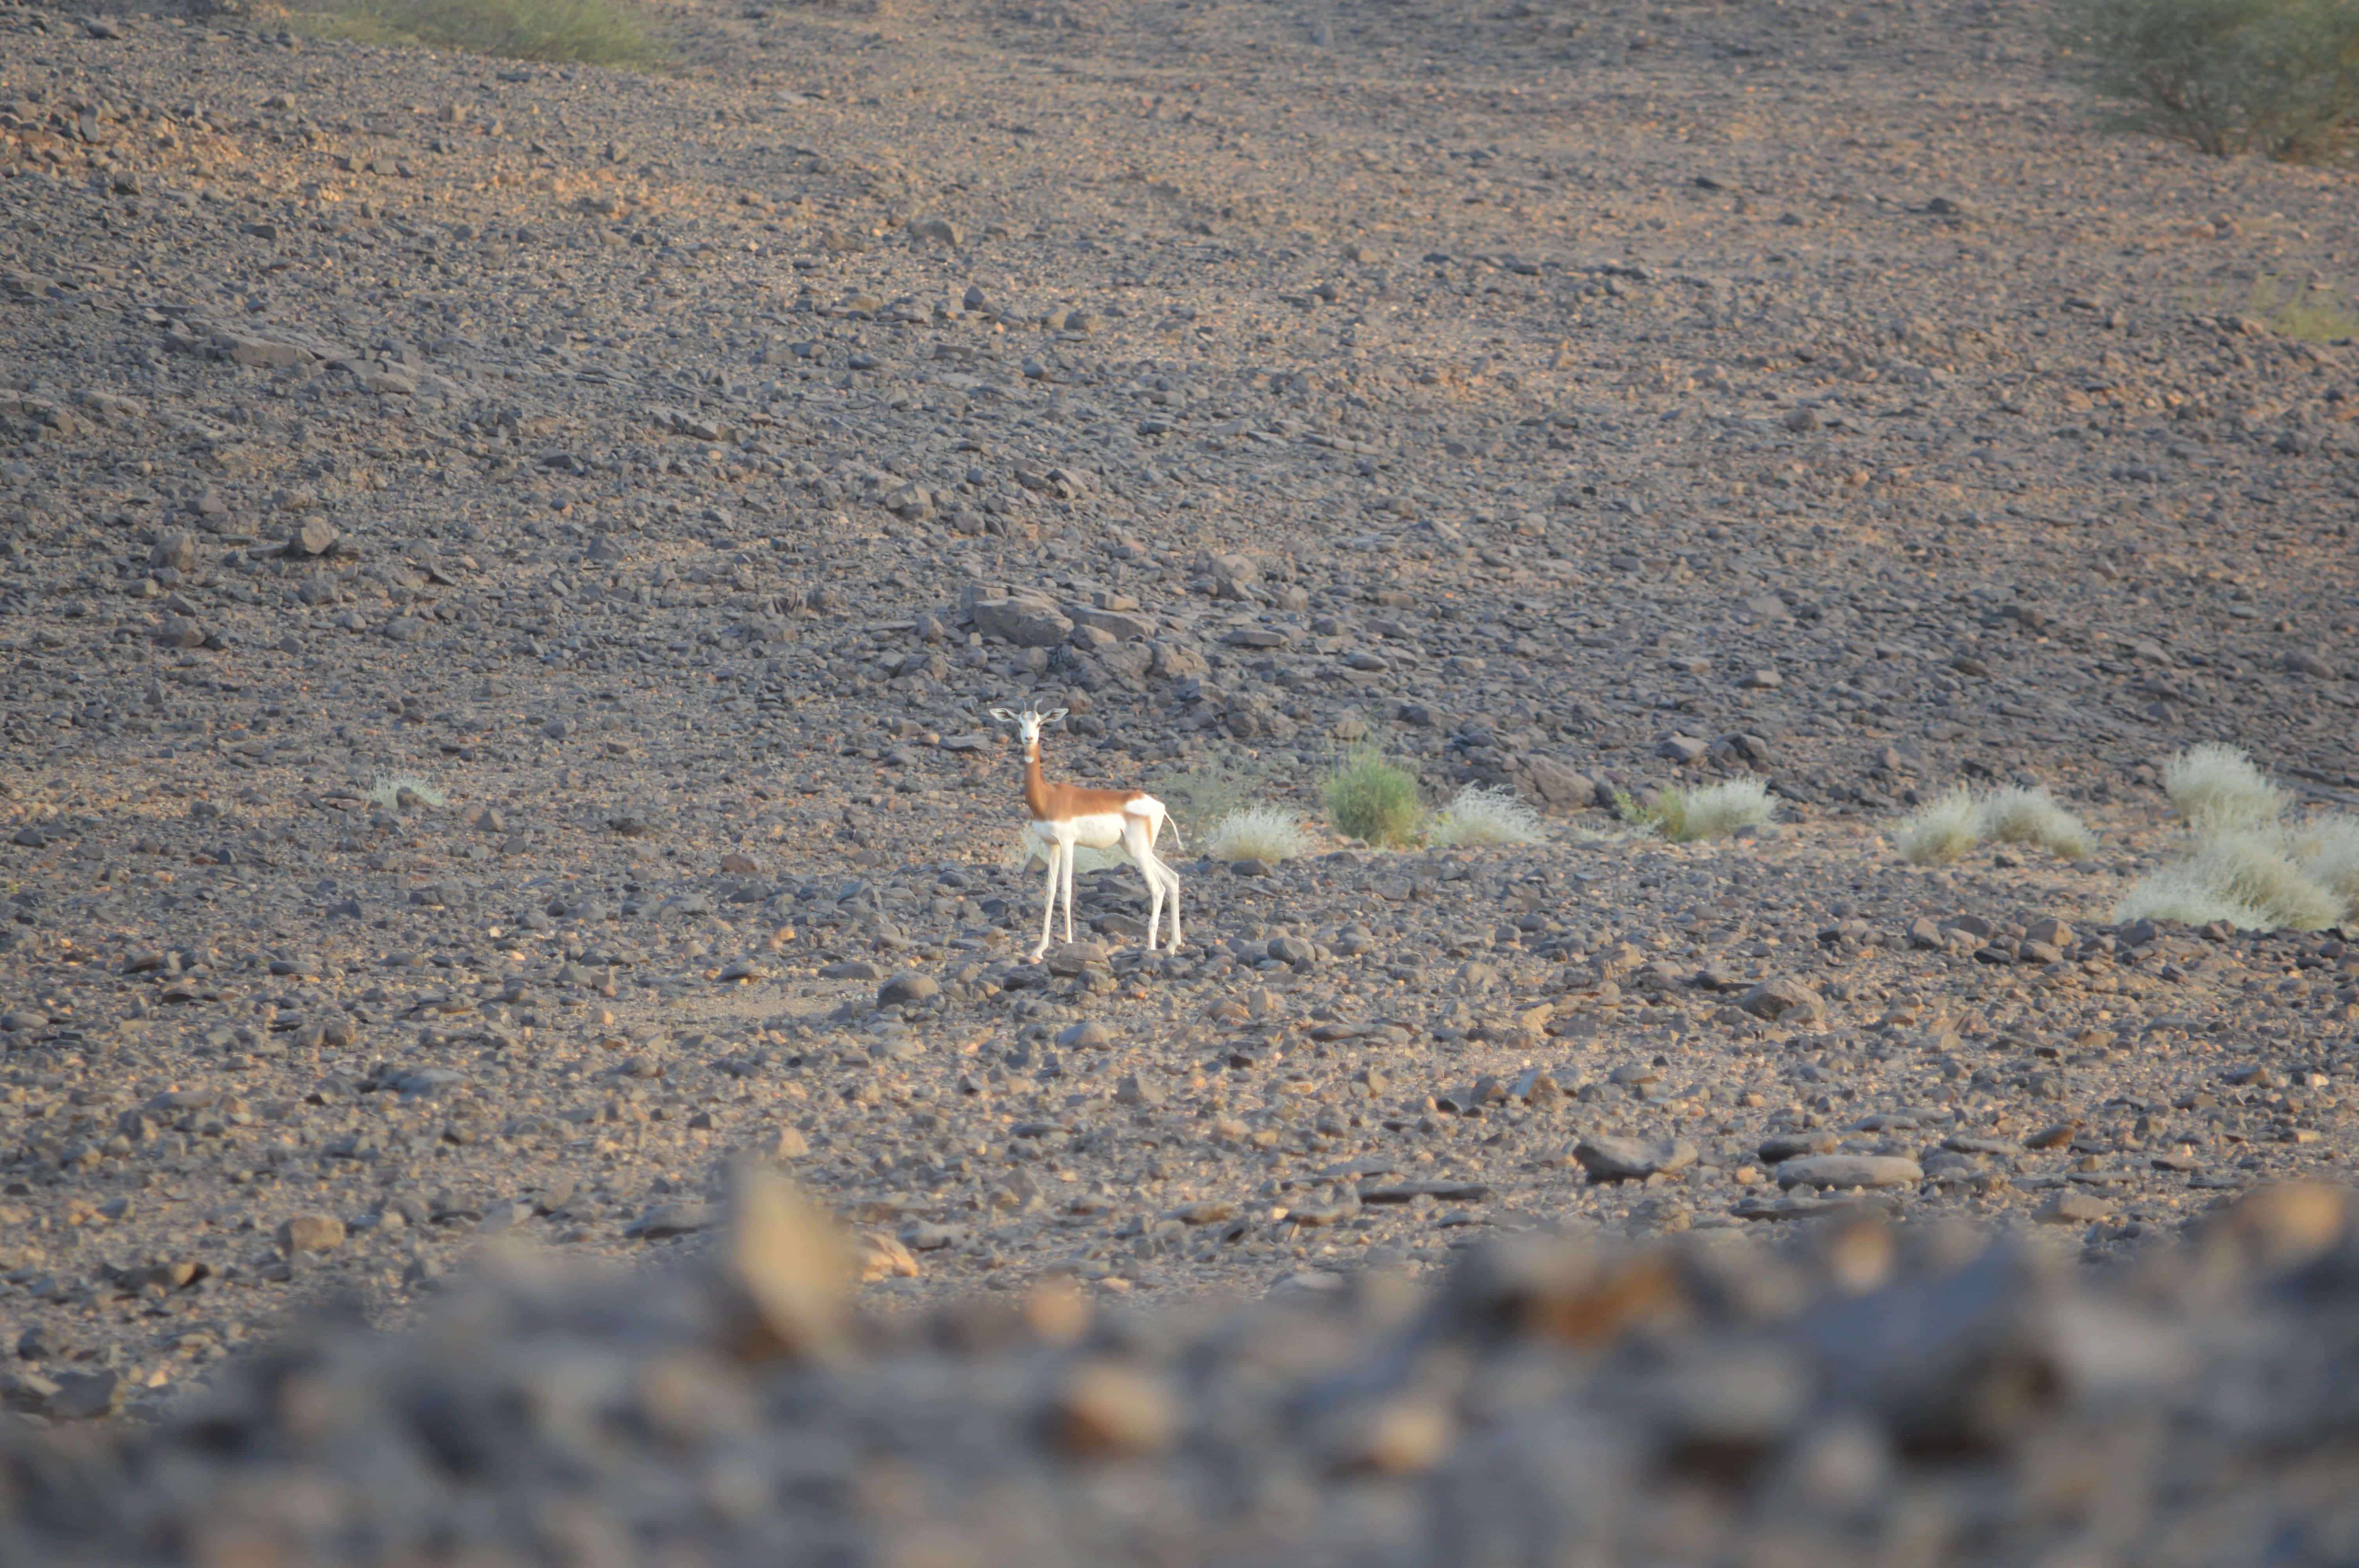 New Observations Of Dama Gazelles In The Wild